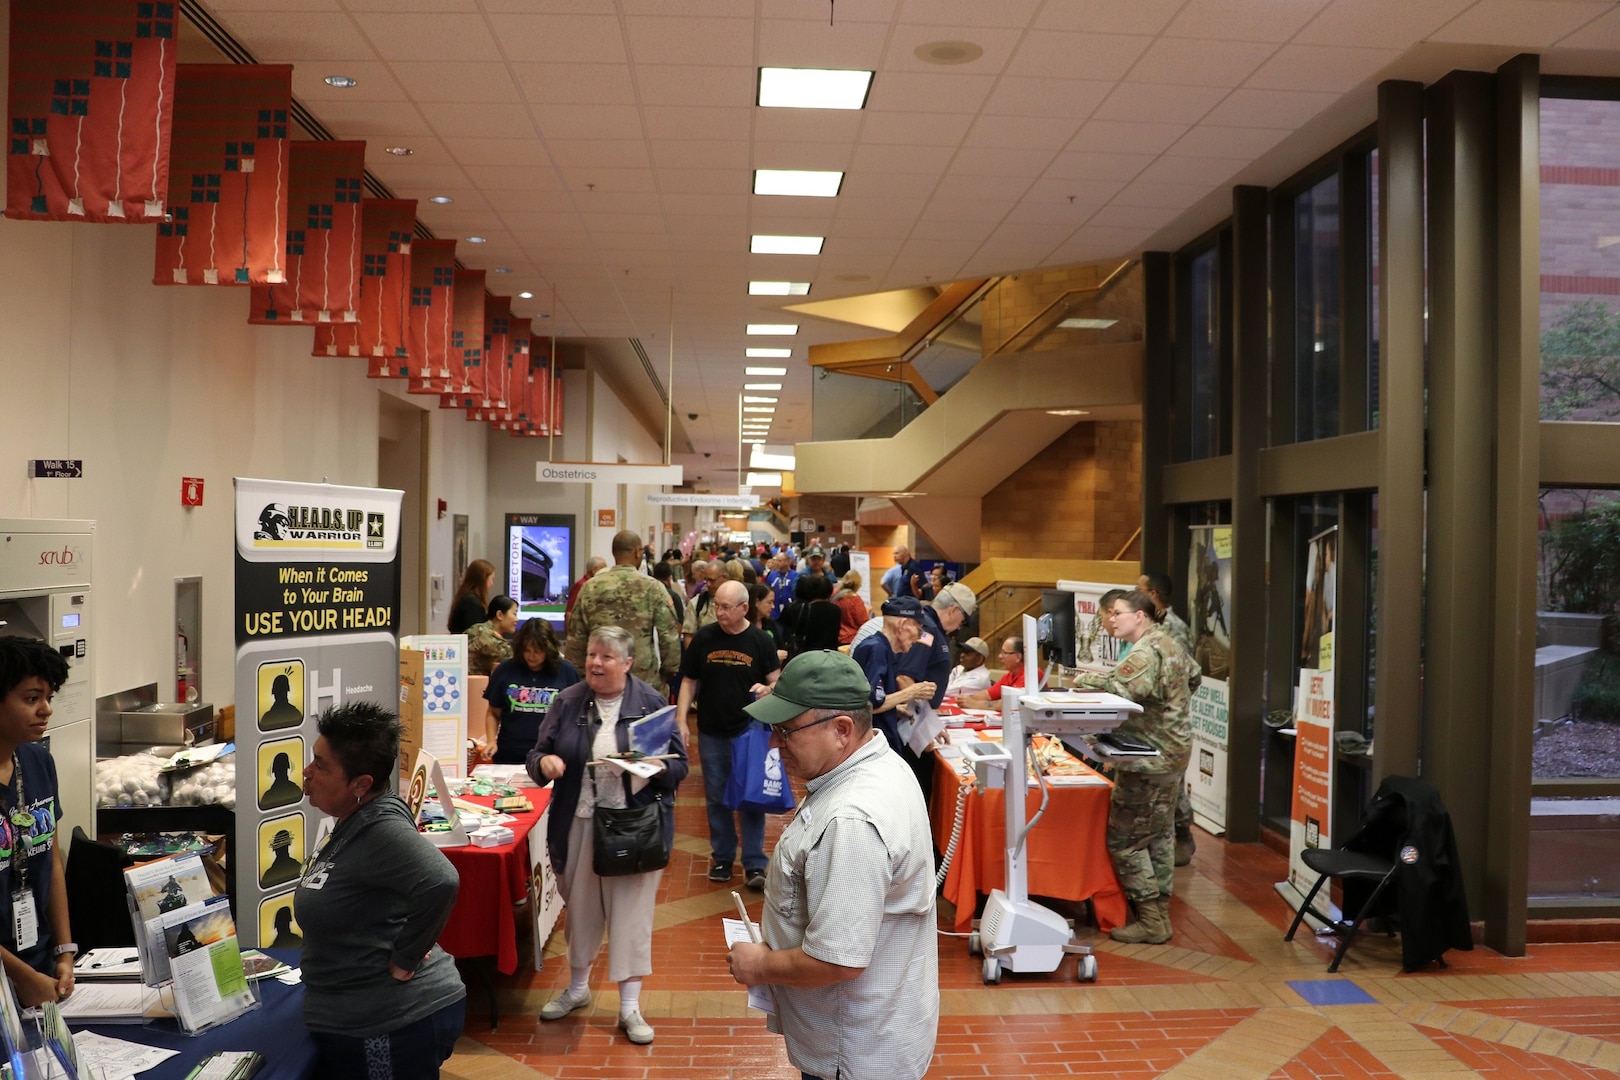 Retirees visited many booths and services during Joint Base San Antonio’s Military Retiree Appreciation Day Oct. 19, hosted by Brooke Army Medical Center.